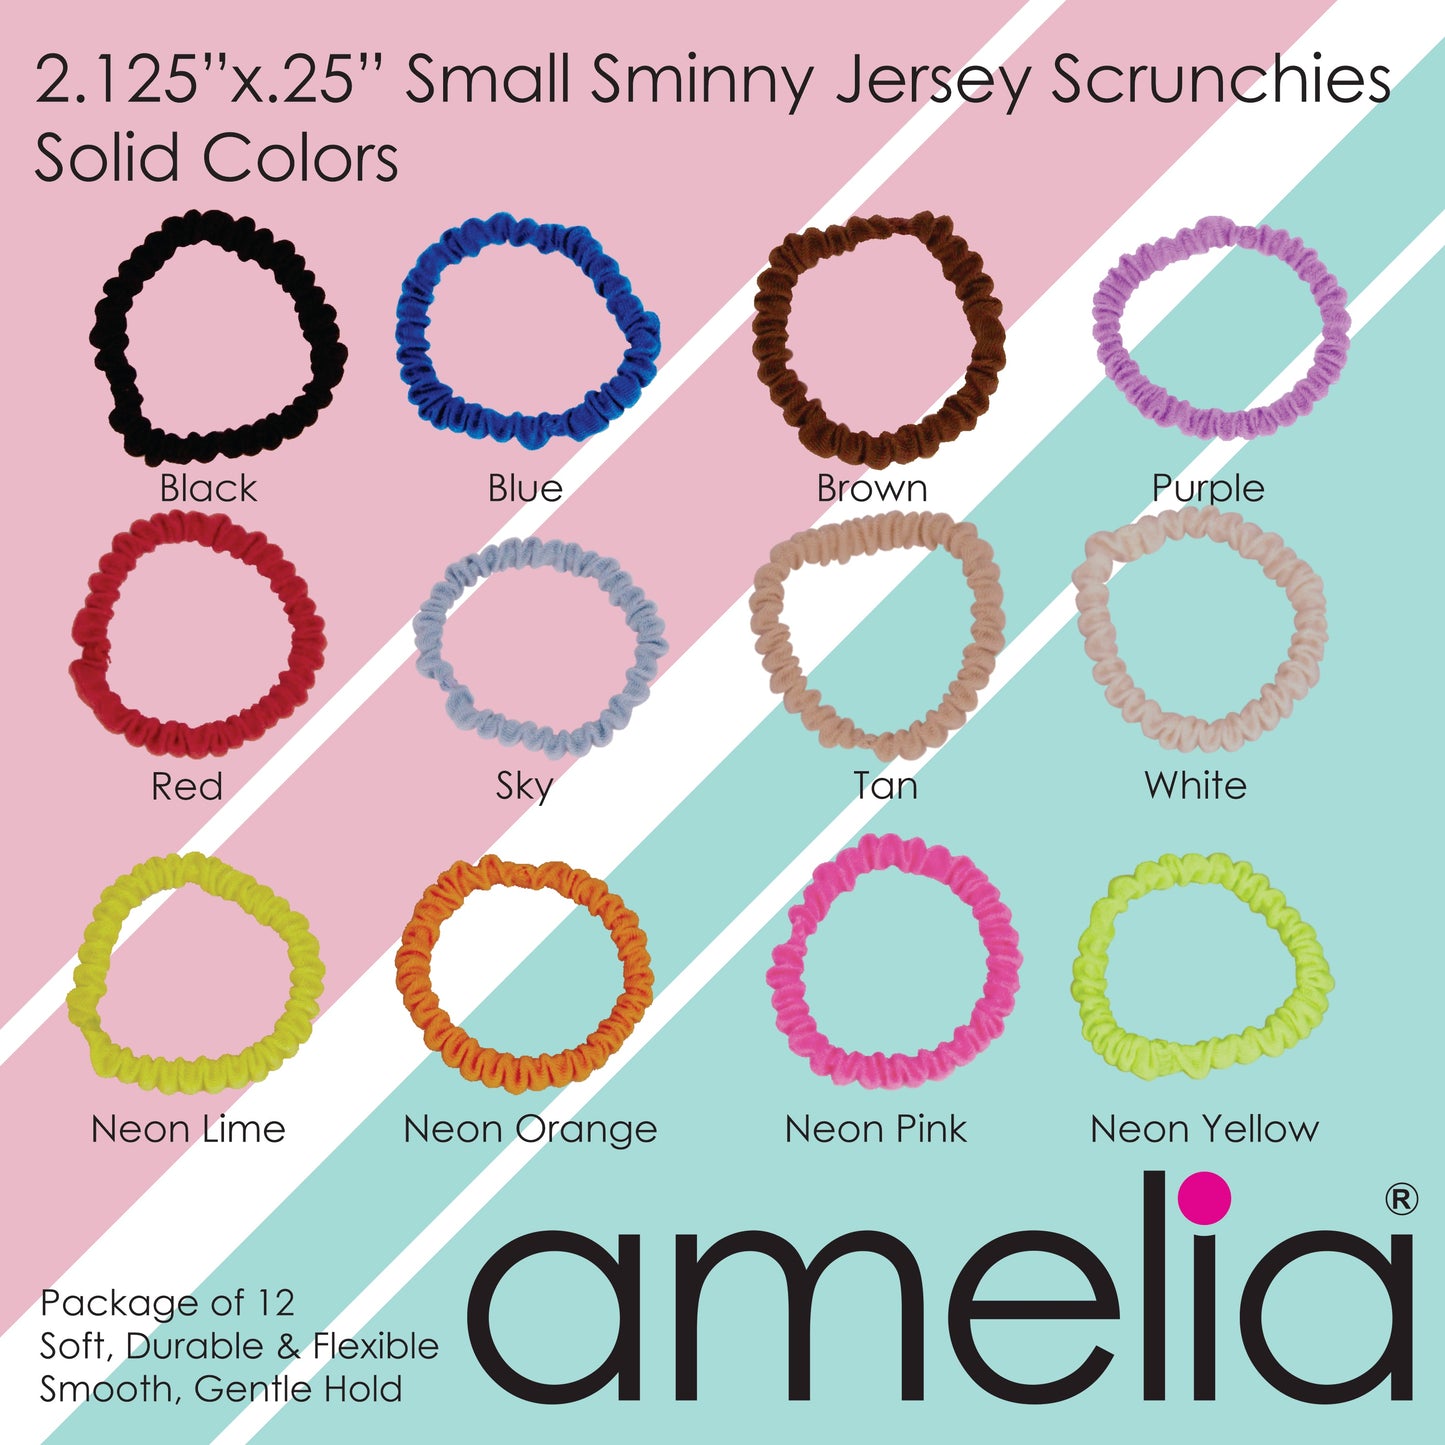 Amelia Beauty, Neon Orange Skinny Jersey Scrunchies, 2.125in Diameter, Gentle on Hair, Strong Hold, No Snag, No Dents or Creases. 12 Pack